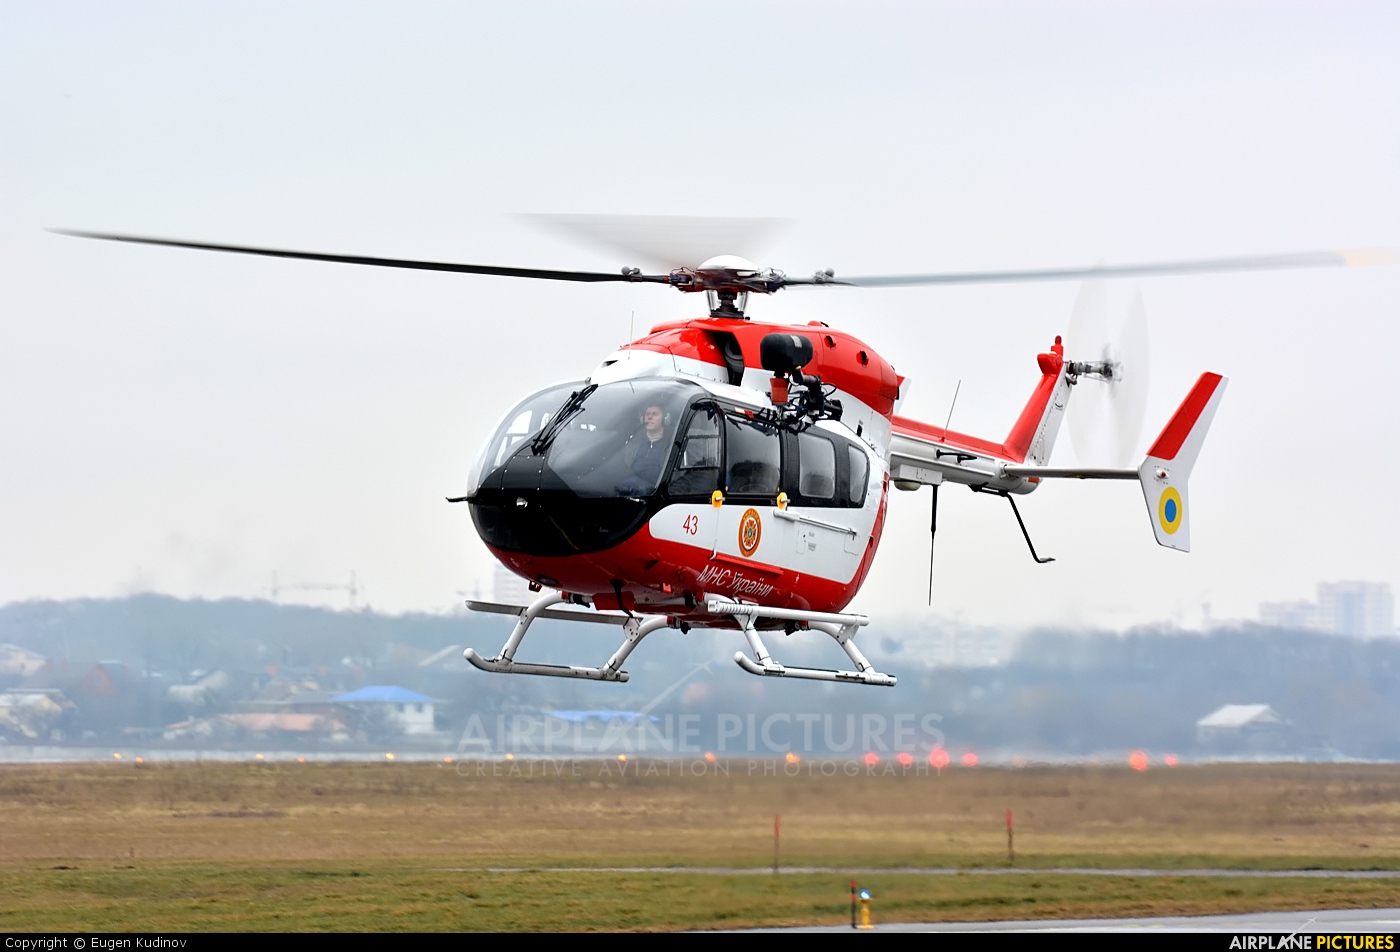 Ukraine - Ministry of Emergency Situations 43 RED aircraft at Kyiv - Zhulyany